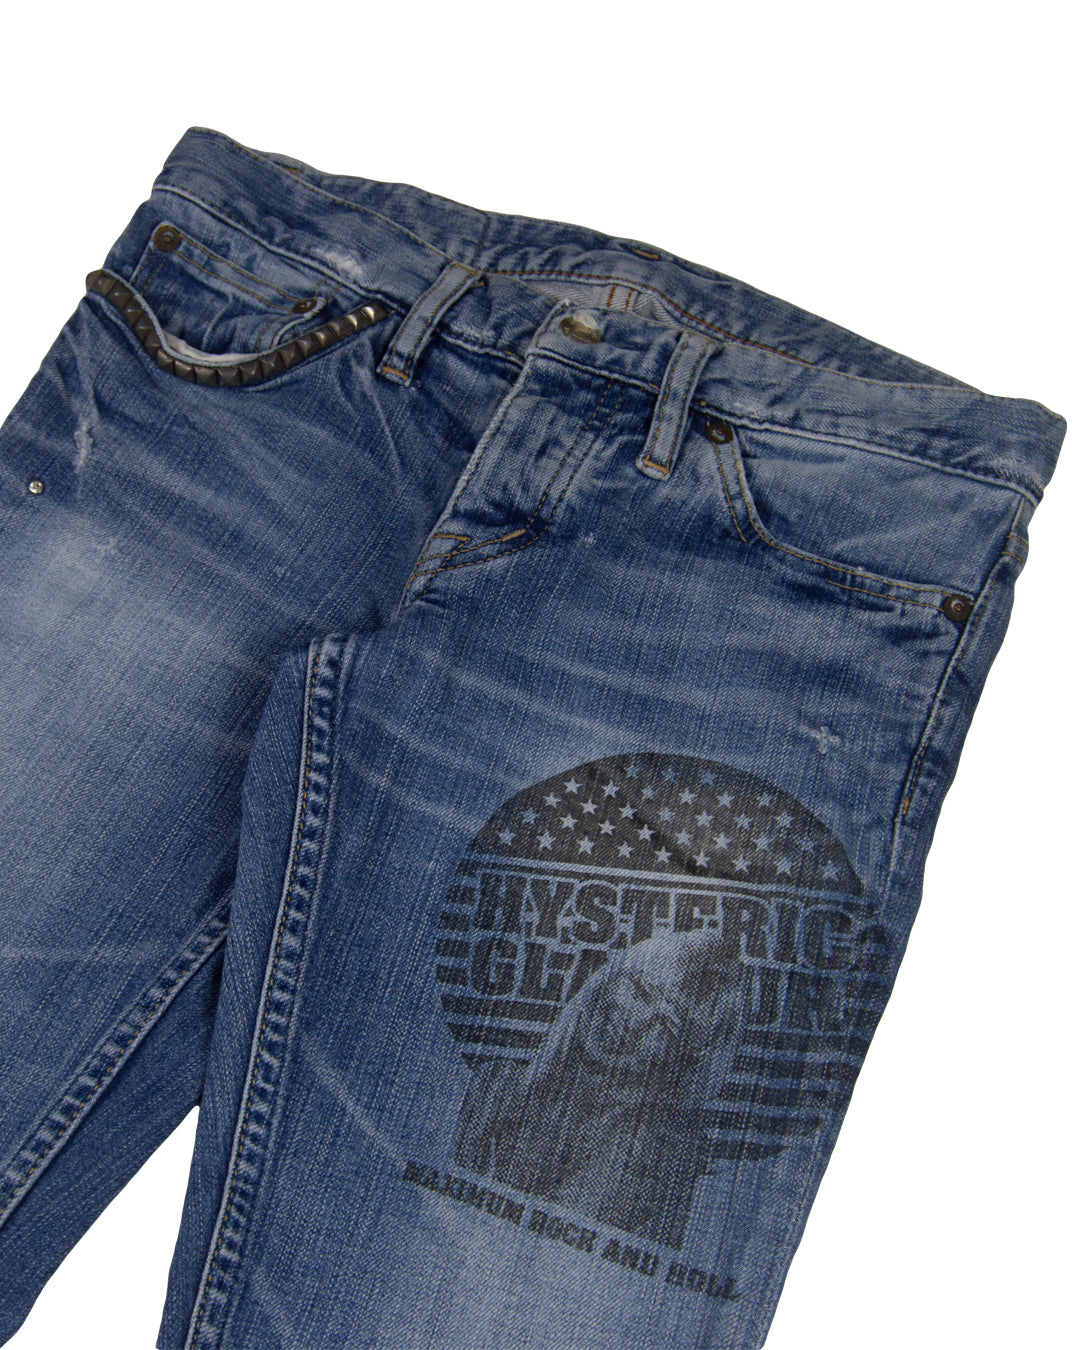 Hysteric Glamour Maximum Rock and Roll Distressed Denim